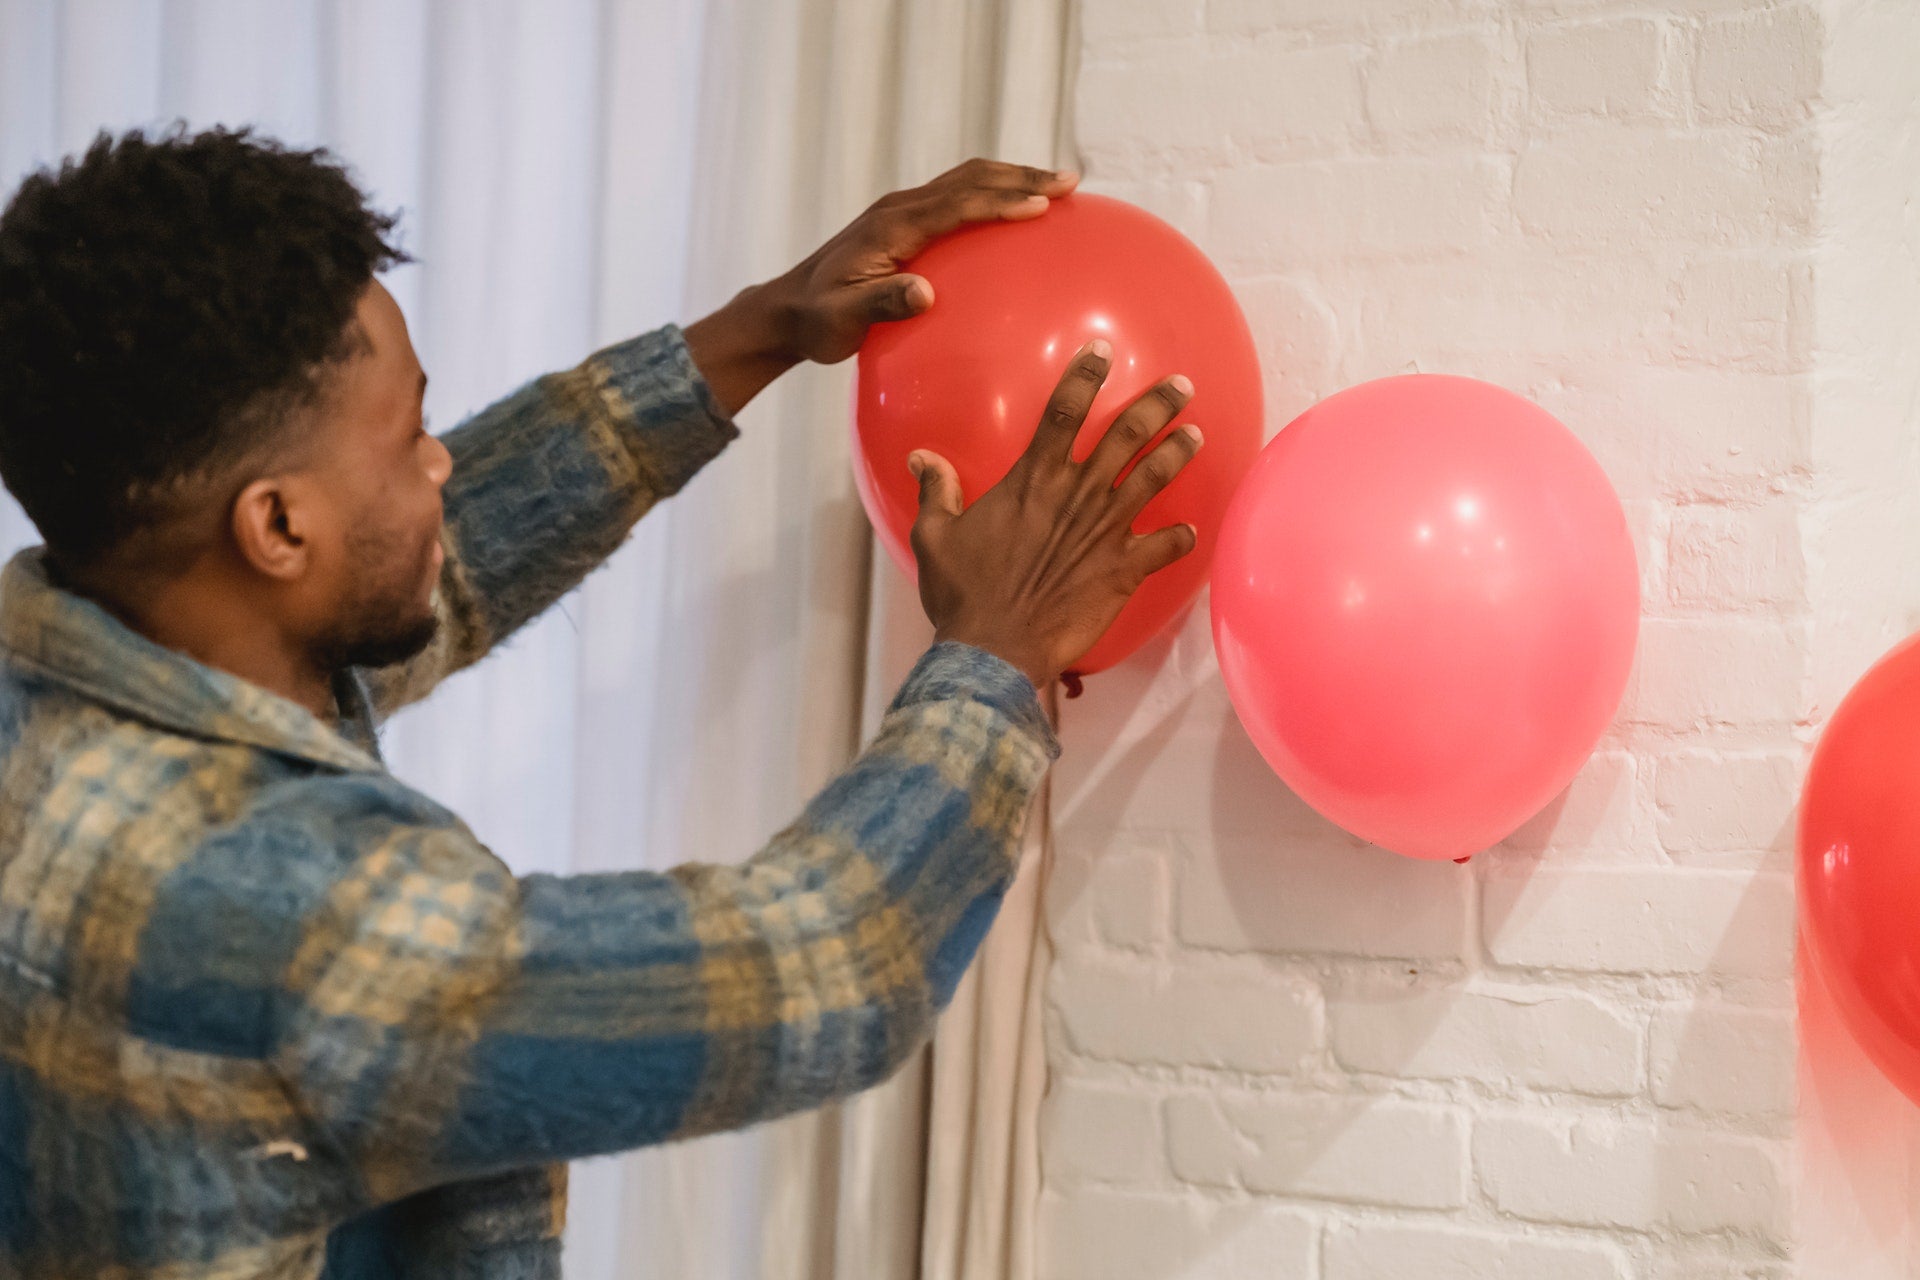 man putting up valentine’s day balloons